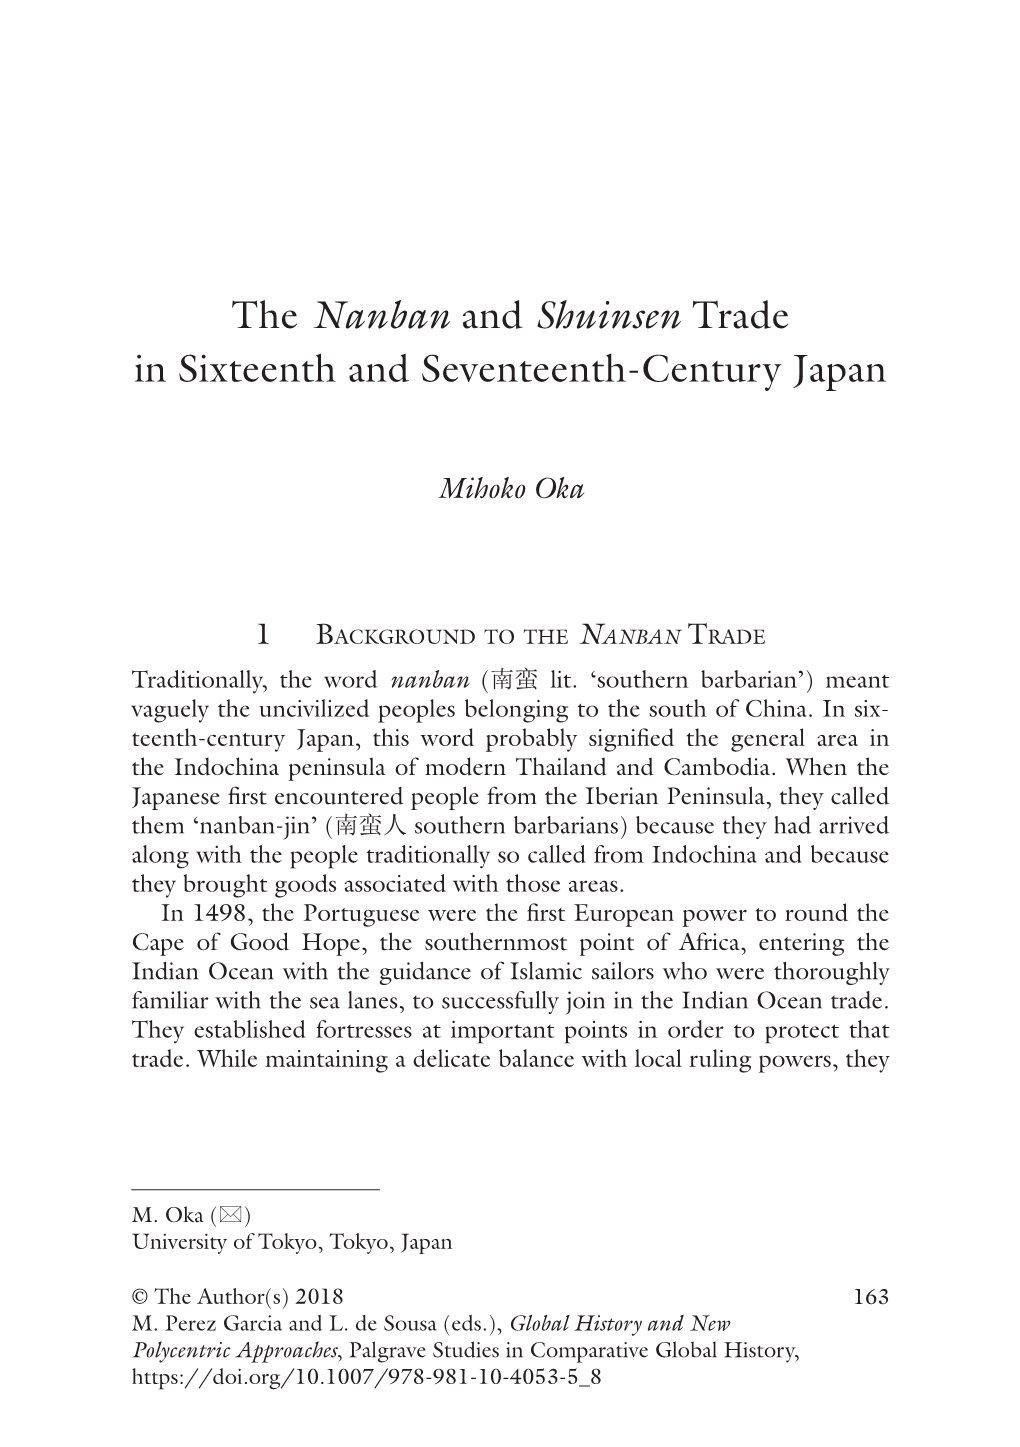 The Nanban and Shuinsen Trade in Sixteenth and Seventeenth-Century Japan